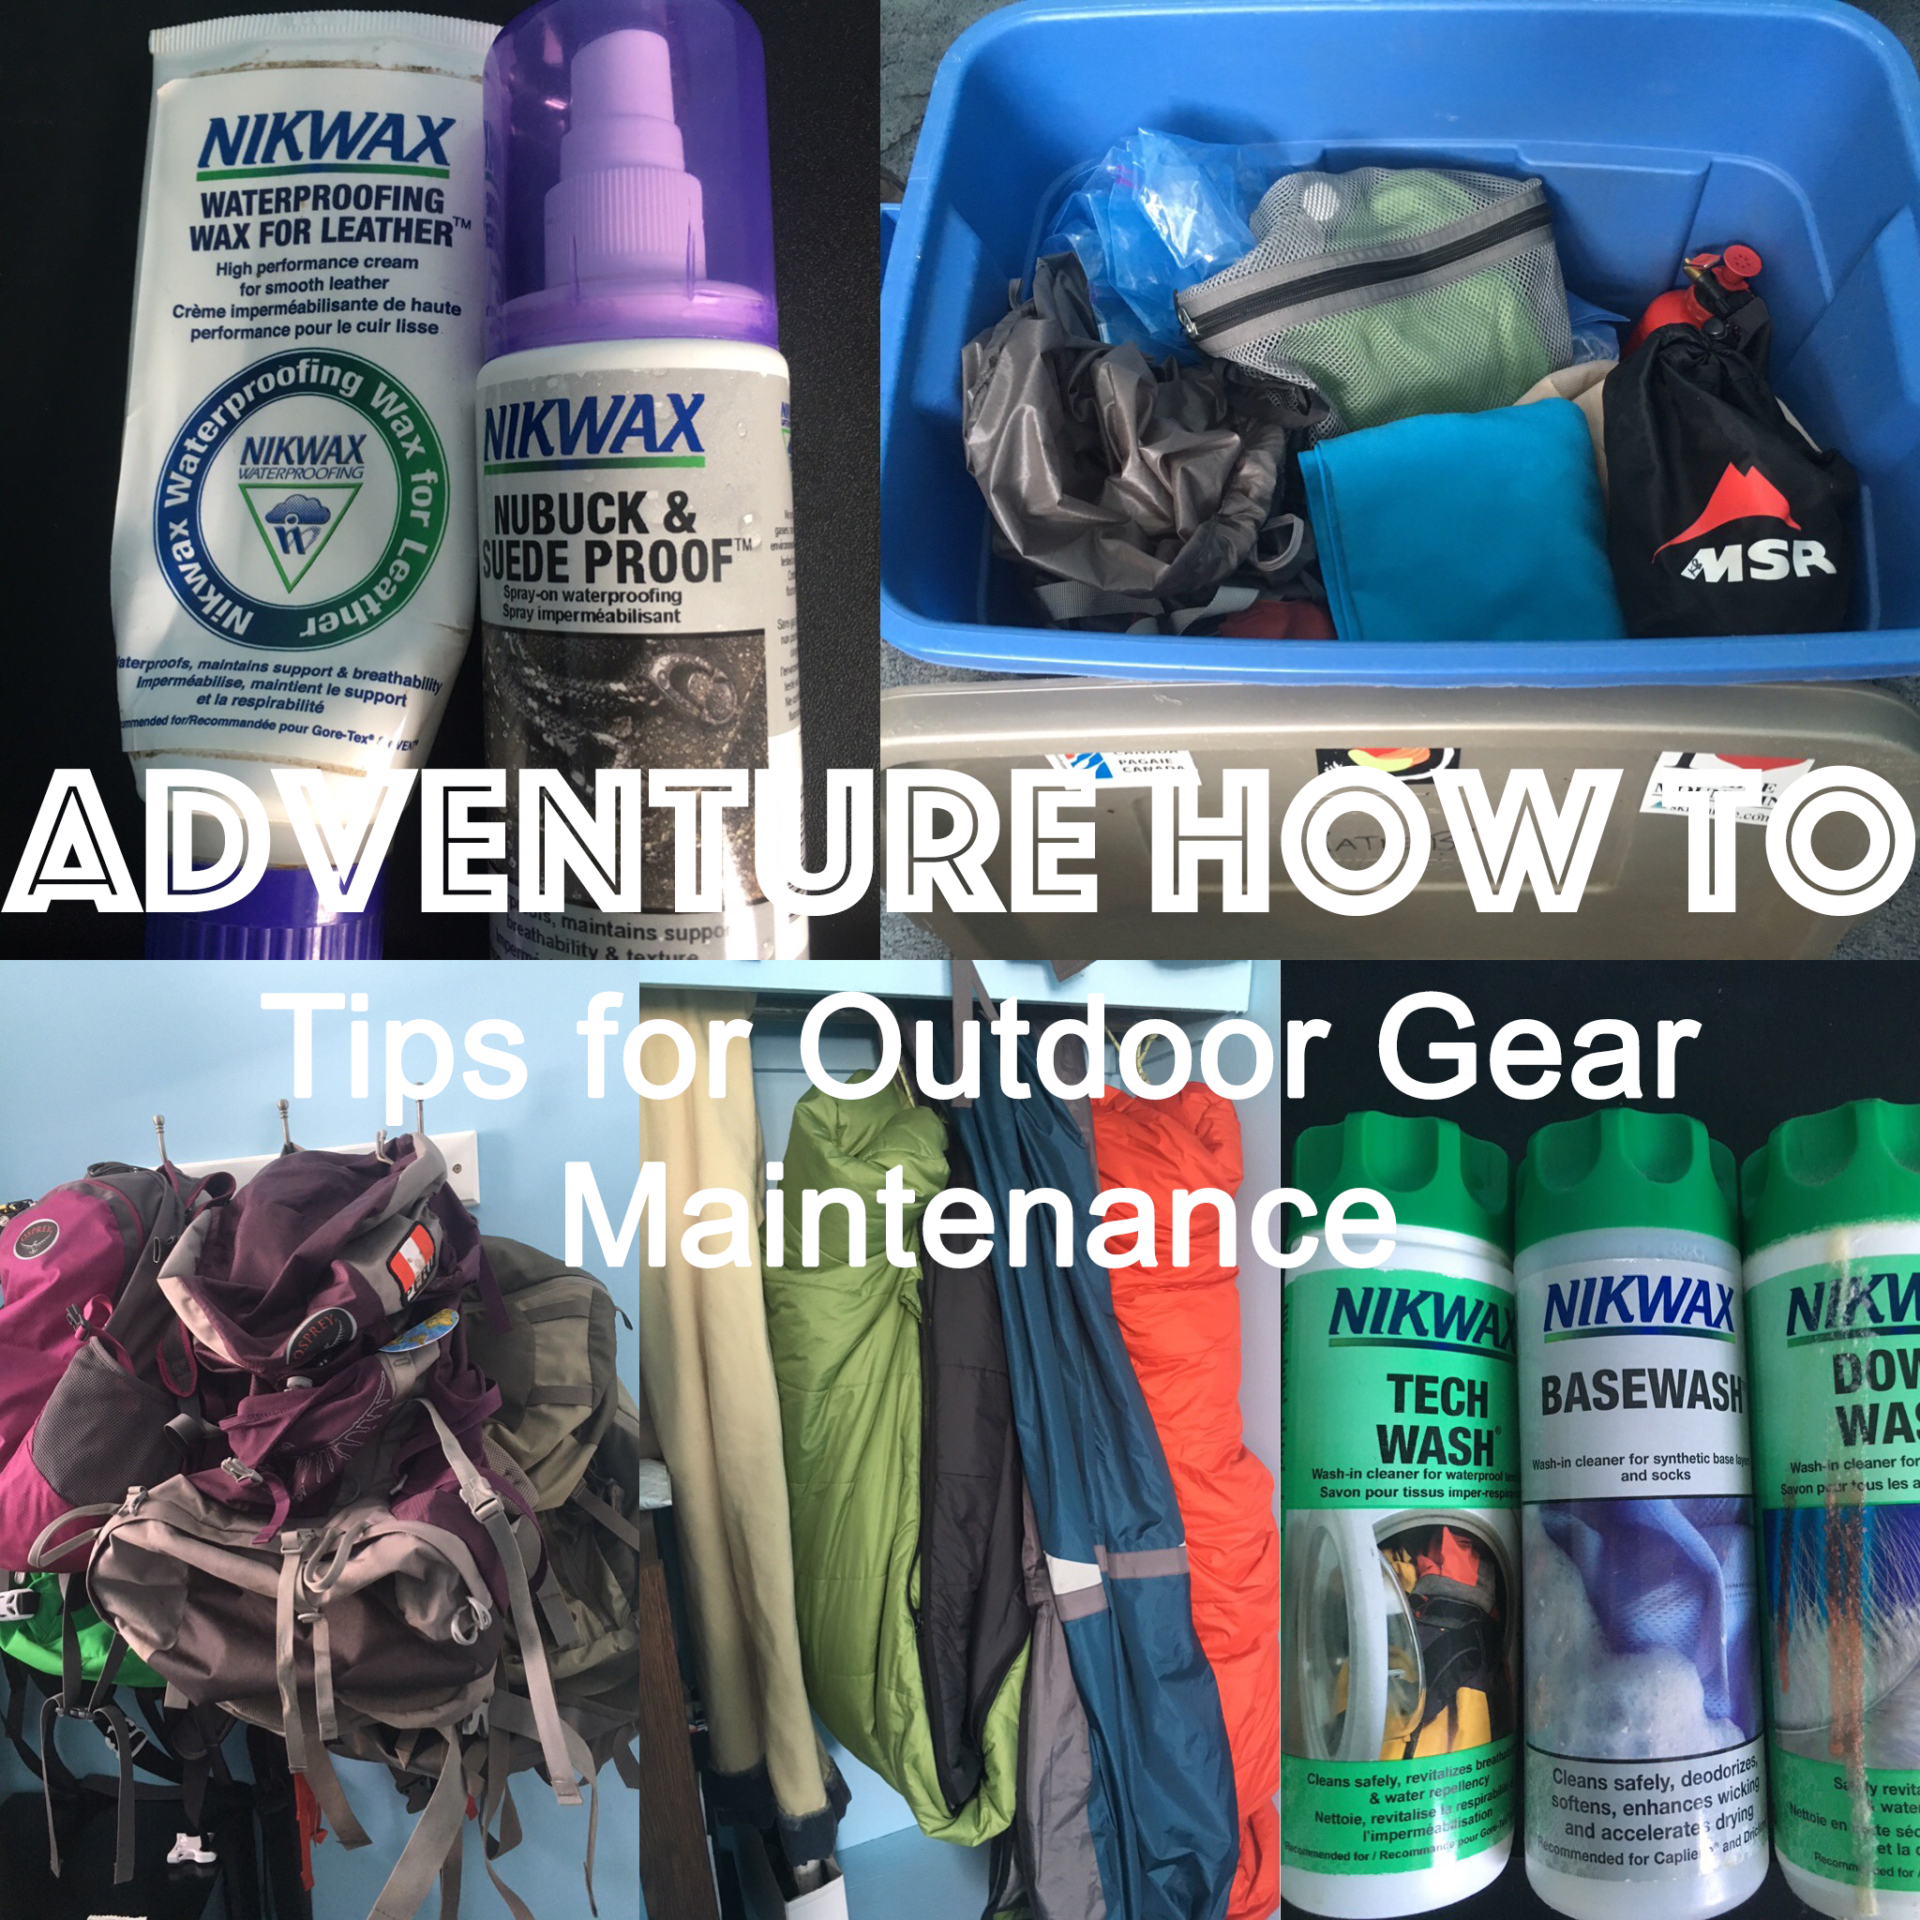 Adventure How To: The Basics of Outdoor Gear Maintenance